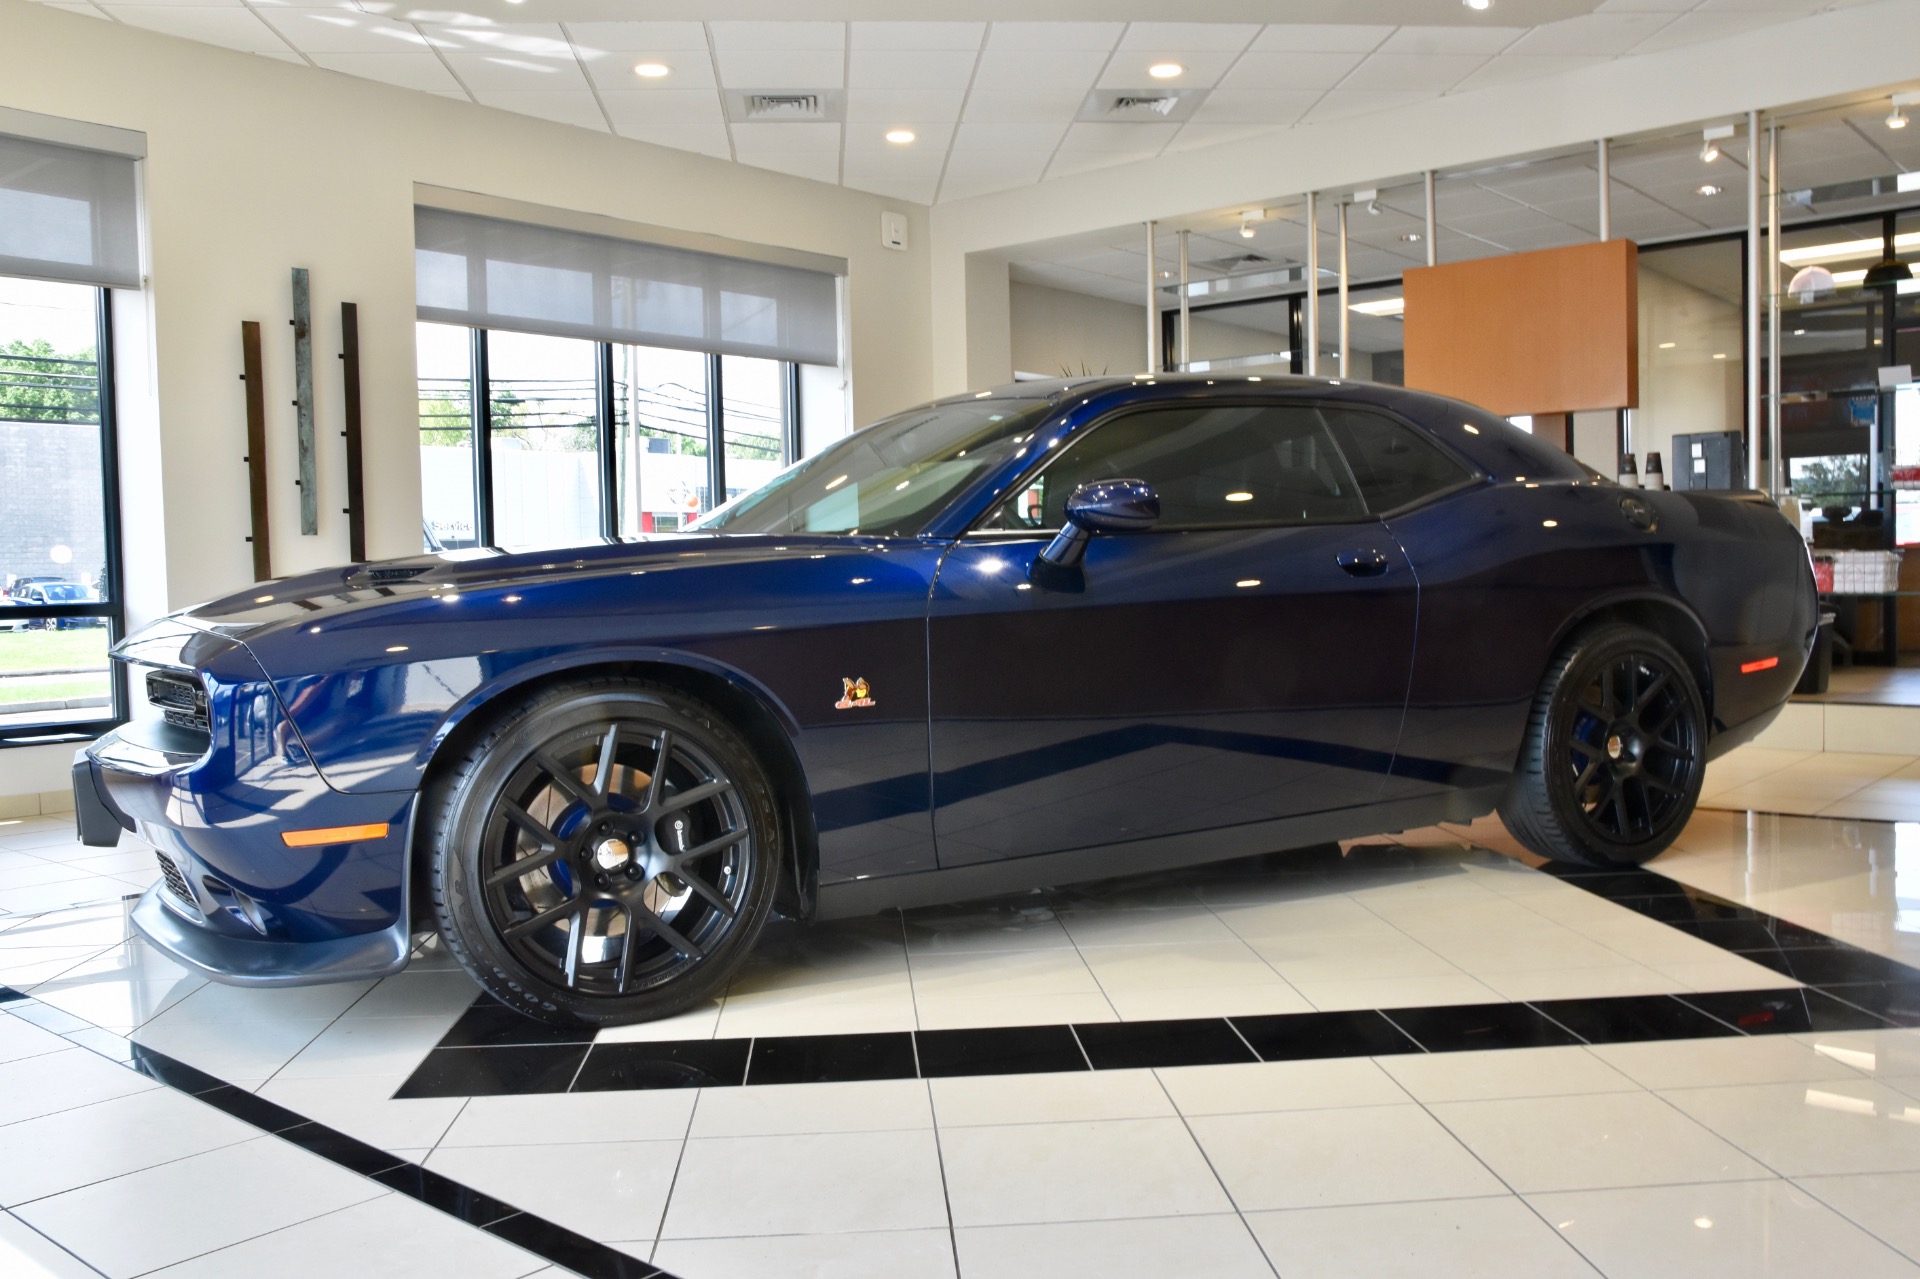 Used 2015 Dodge Challenger R/T Scat Pack For Sale (Sold)